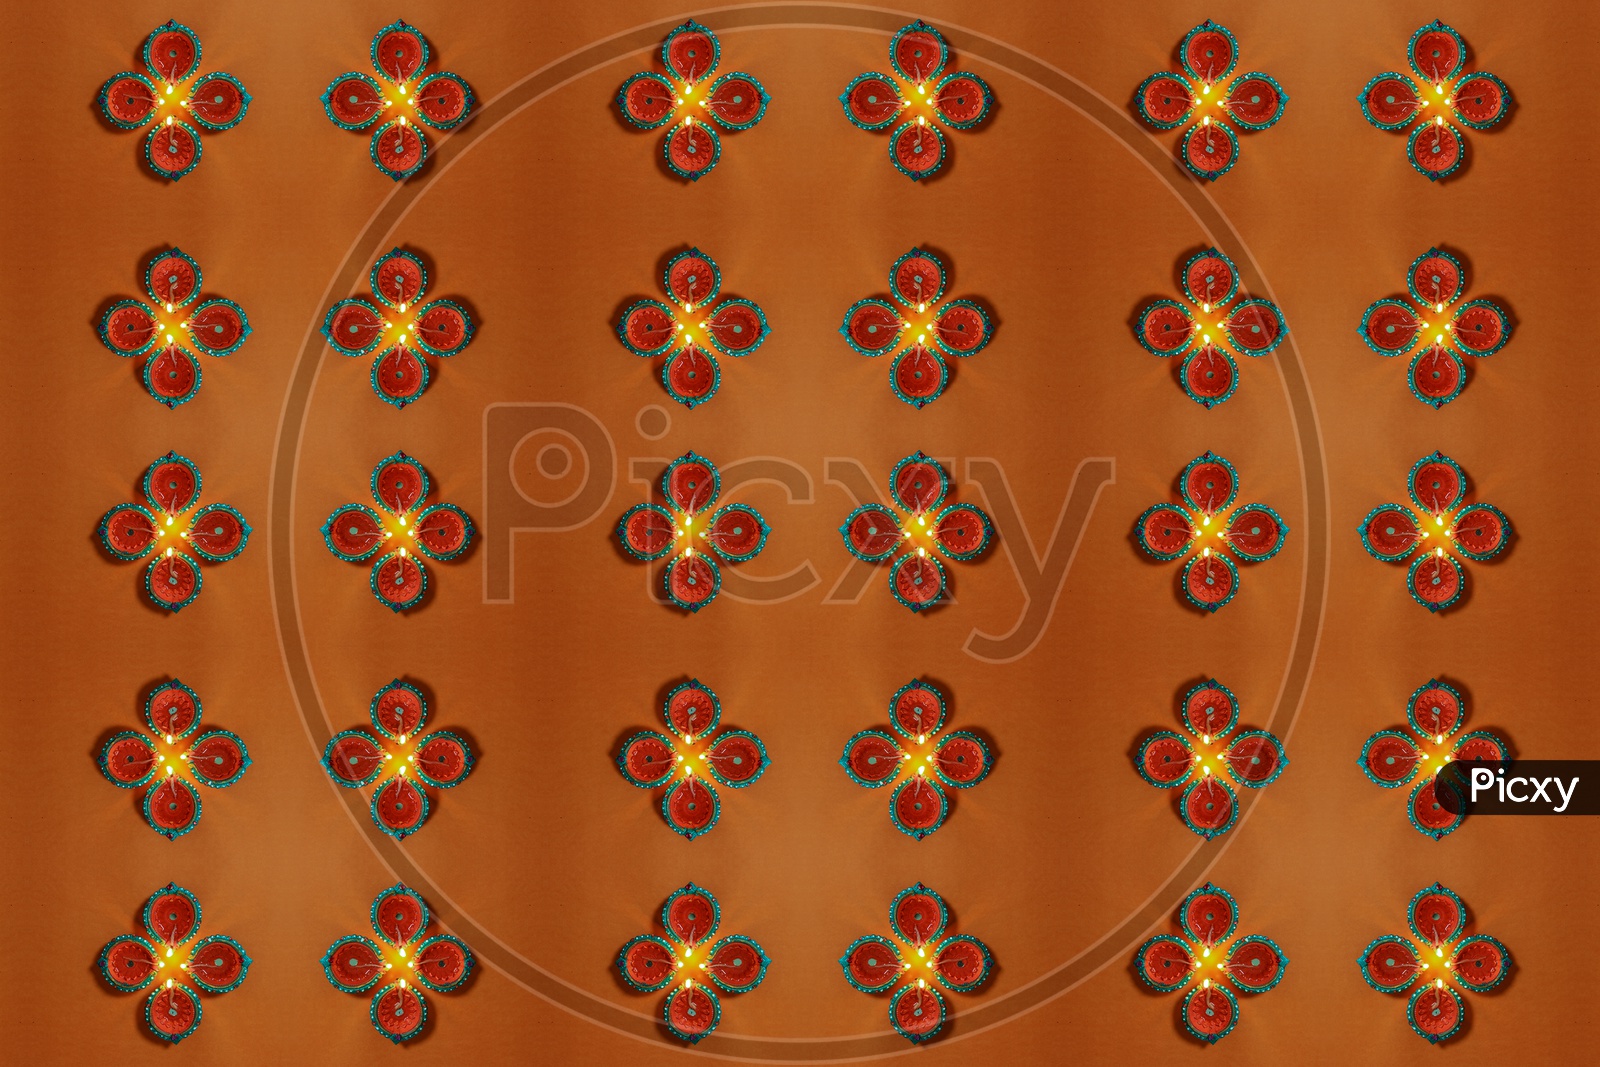 Dias / Diwali lamps Composition Shot Presenting Pattern and Symmetry Forming  a background